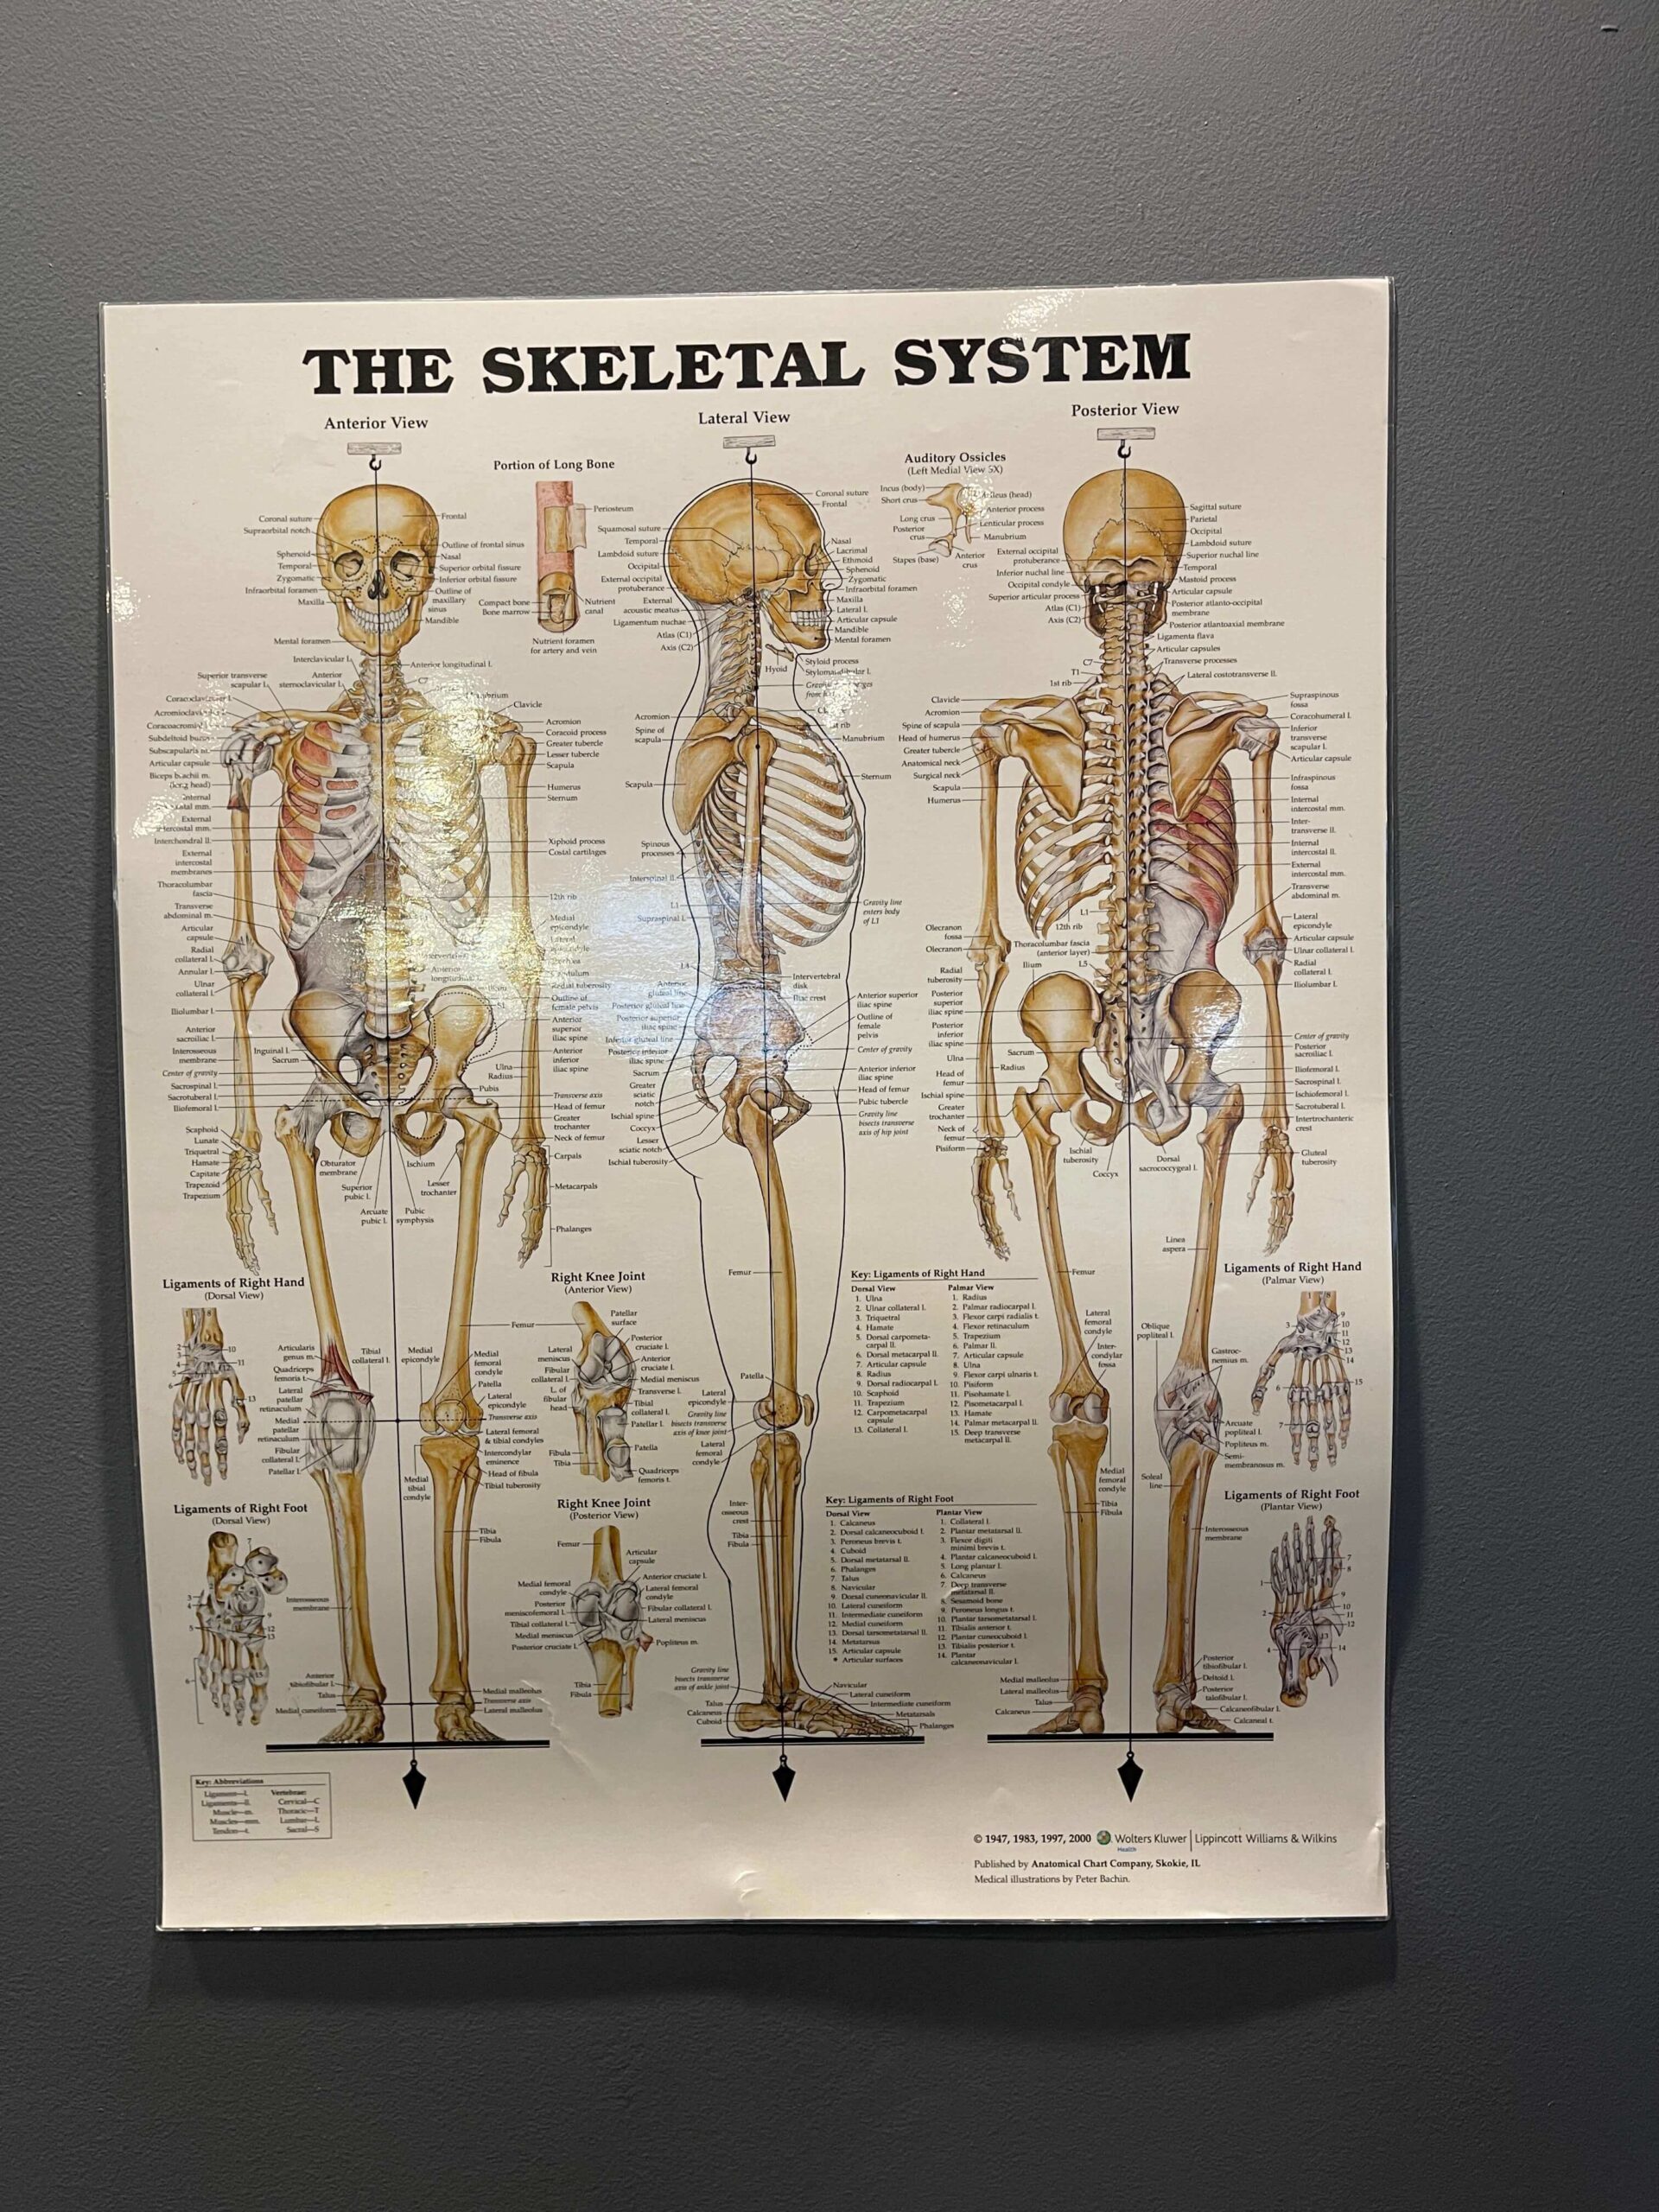 Toorak Chiropractor Wall Poster The Skeletal System Toorak Chiropractor Dr Josh Cogoi - Chiropractic Care Near You